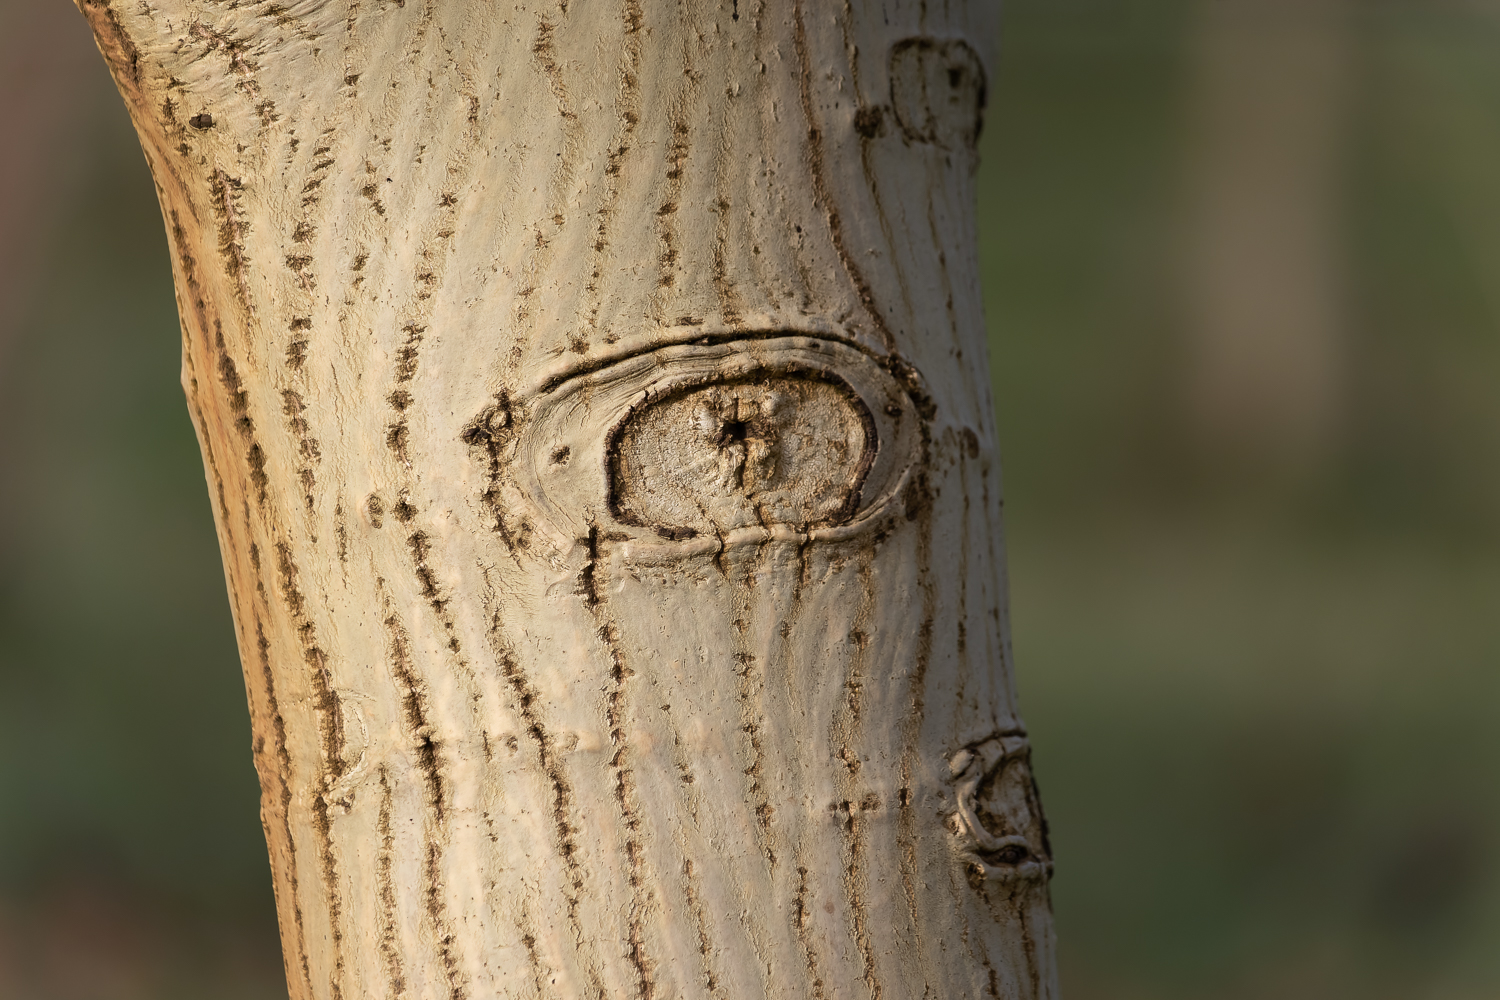 Close-up image of the trunk of a walnut tree